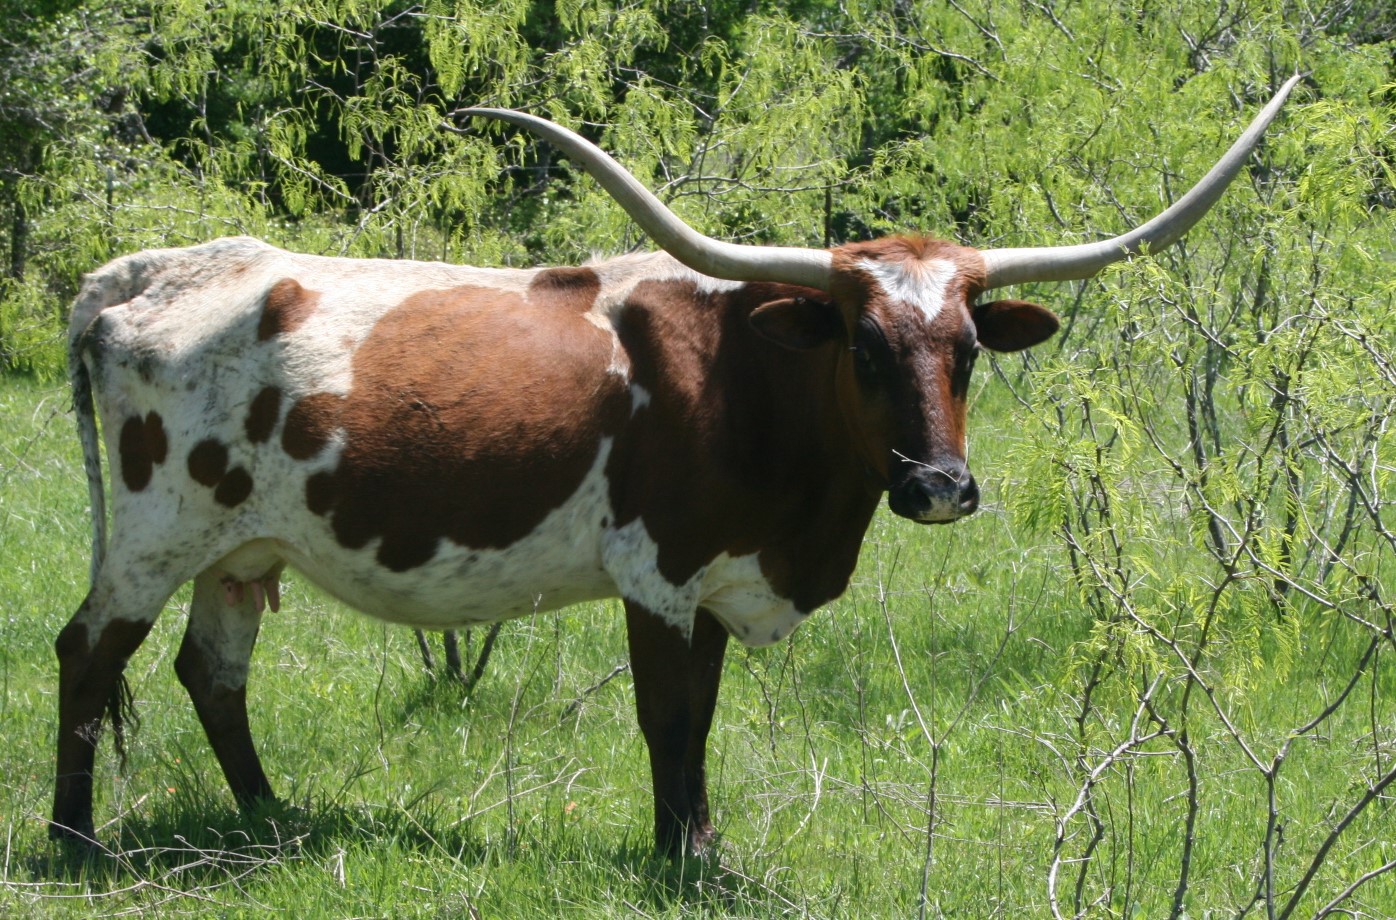 A picture containing grass, outdoor, tree, cow

Description automatically generated